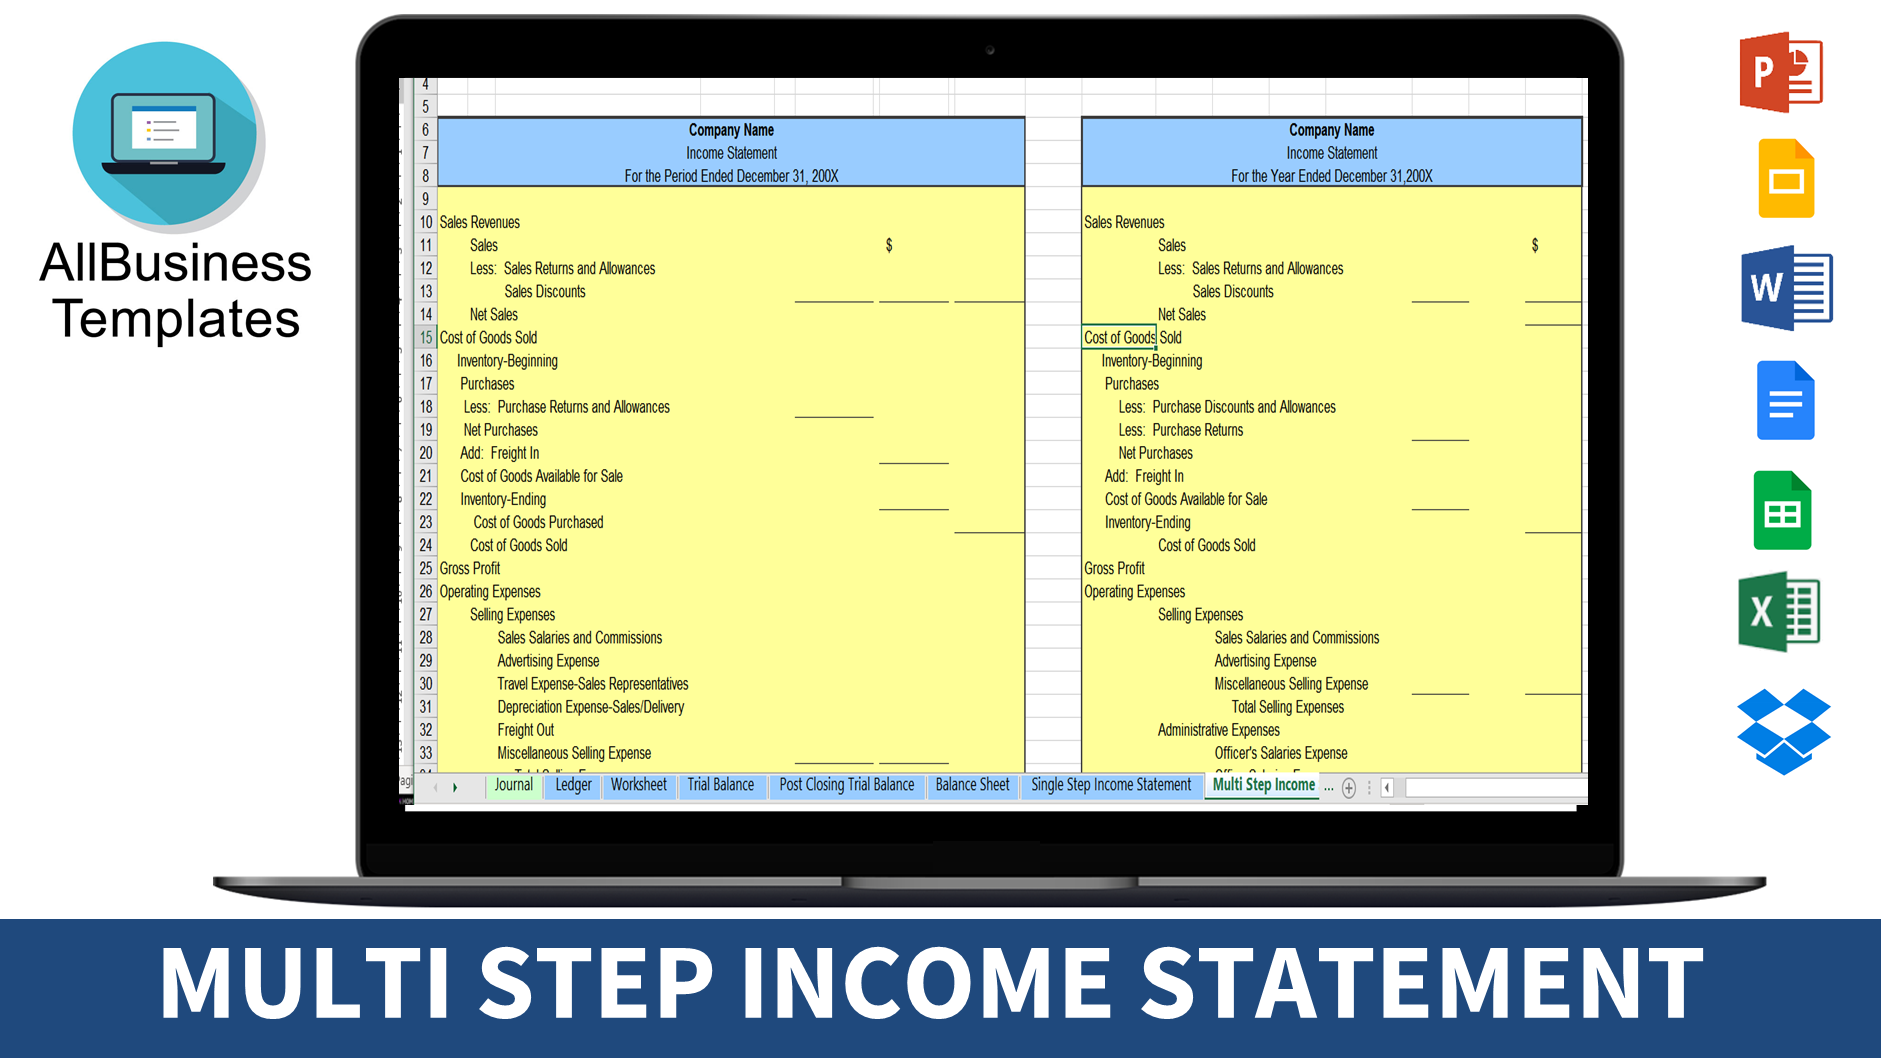 Multi Step Income Statement External Reporting main image